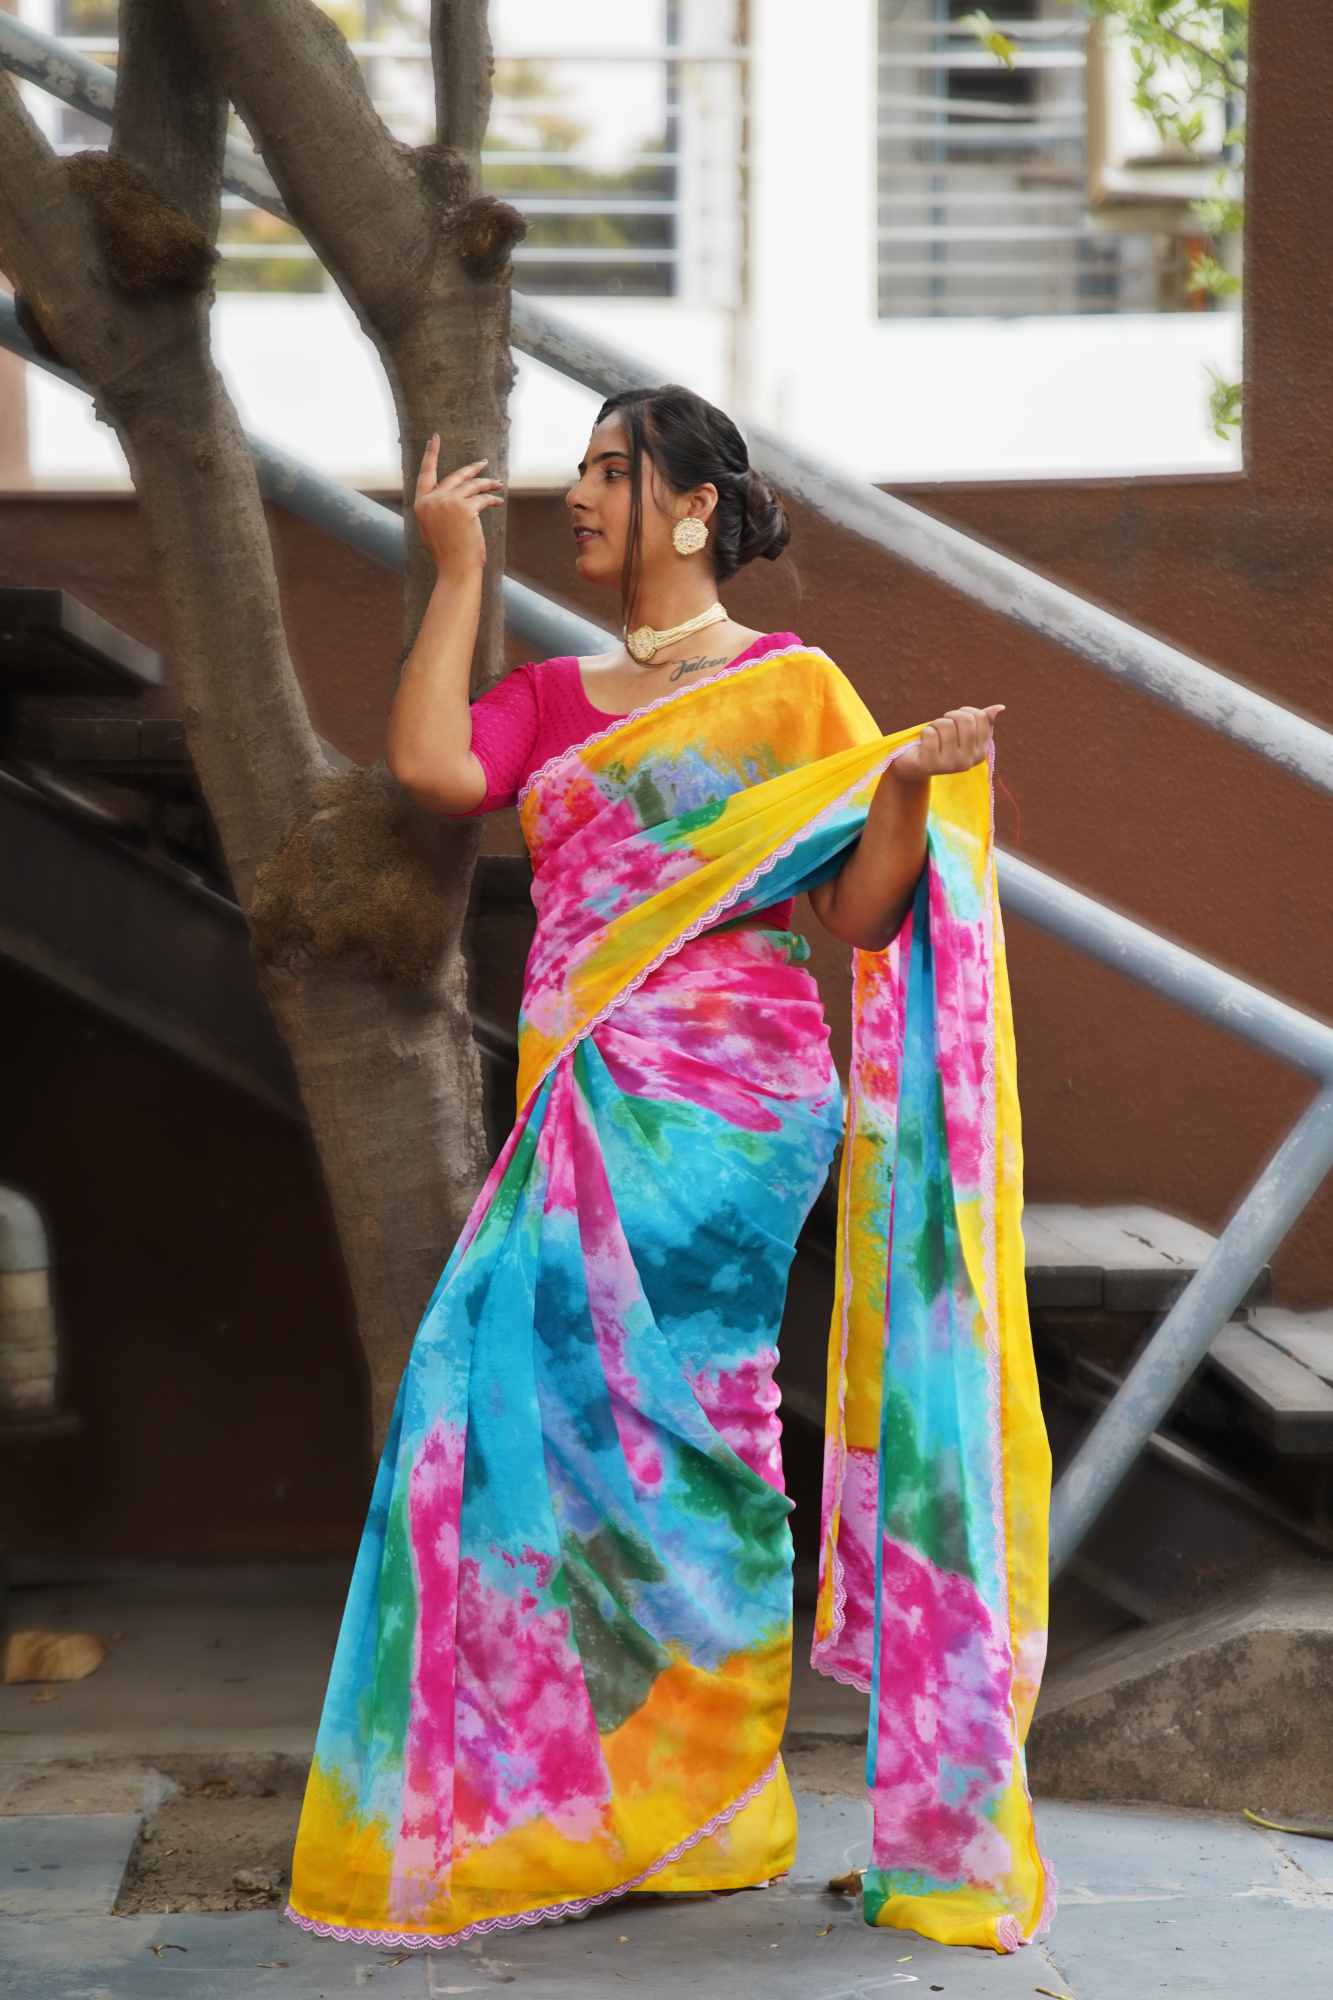 Ready To Wear Alia Bhatt Inspired Rocky Rani Multi Color With Lace Wrap in 1 minute saree